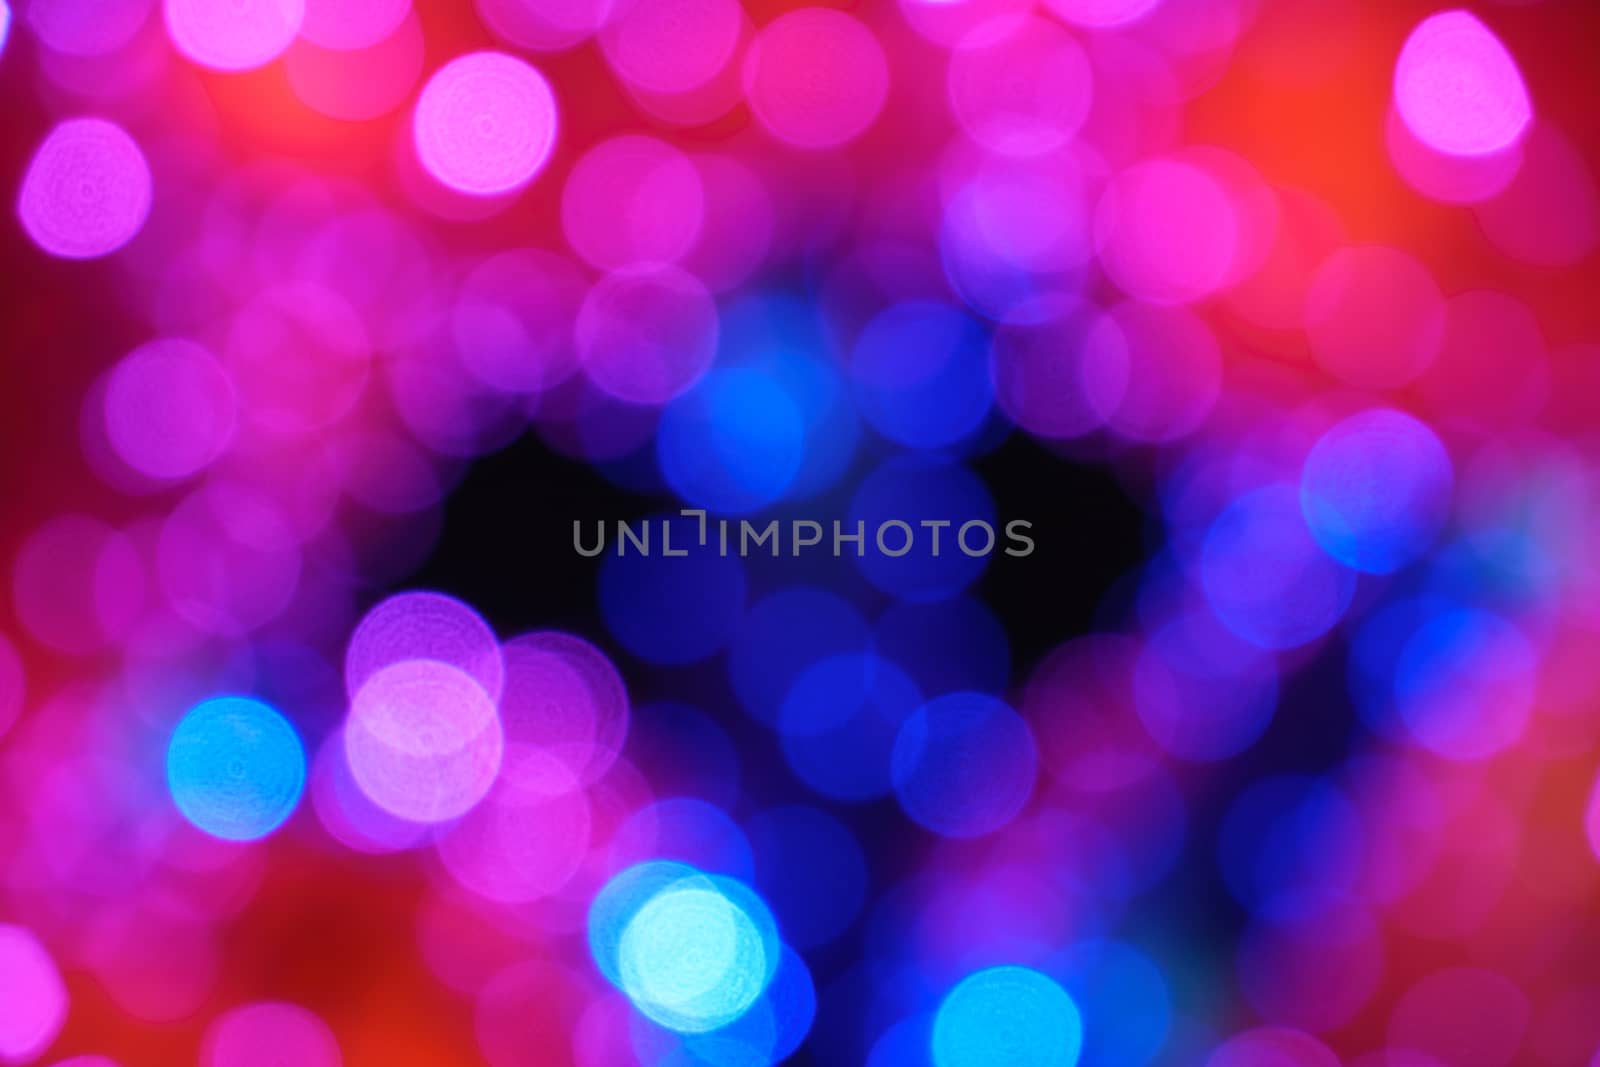 Colorful light night bokeh nature and city landscape blur. Abstract background. Serenity and calm concept out of focus